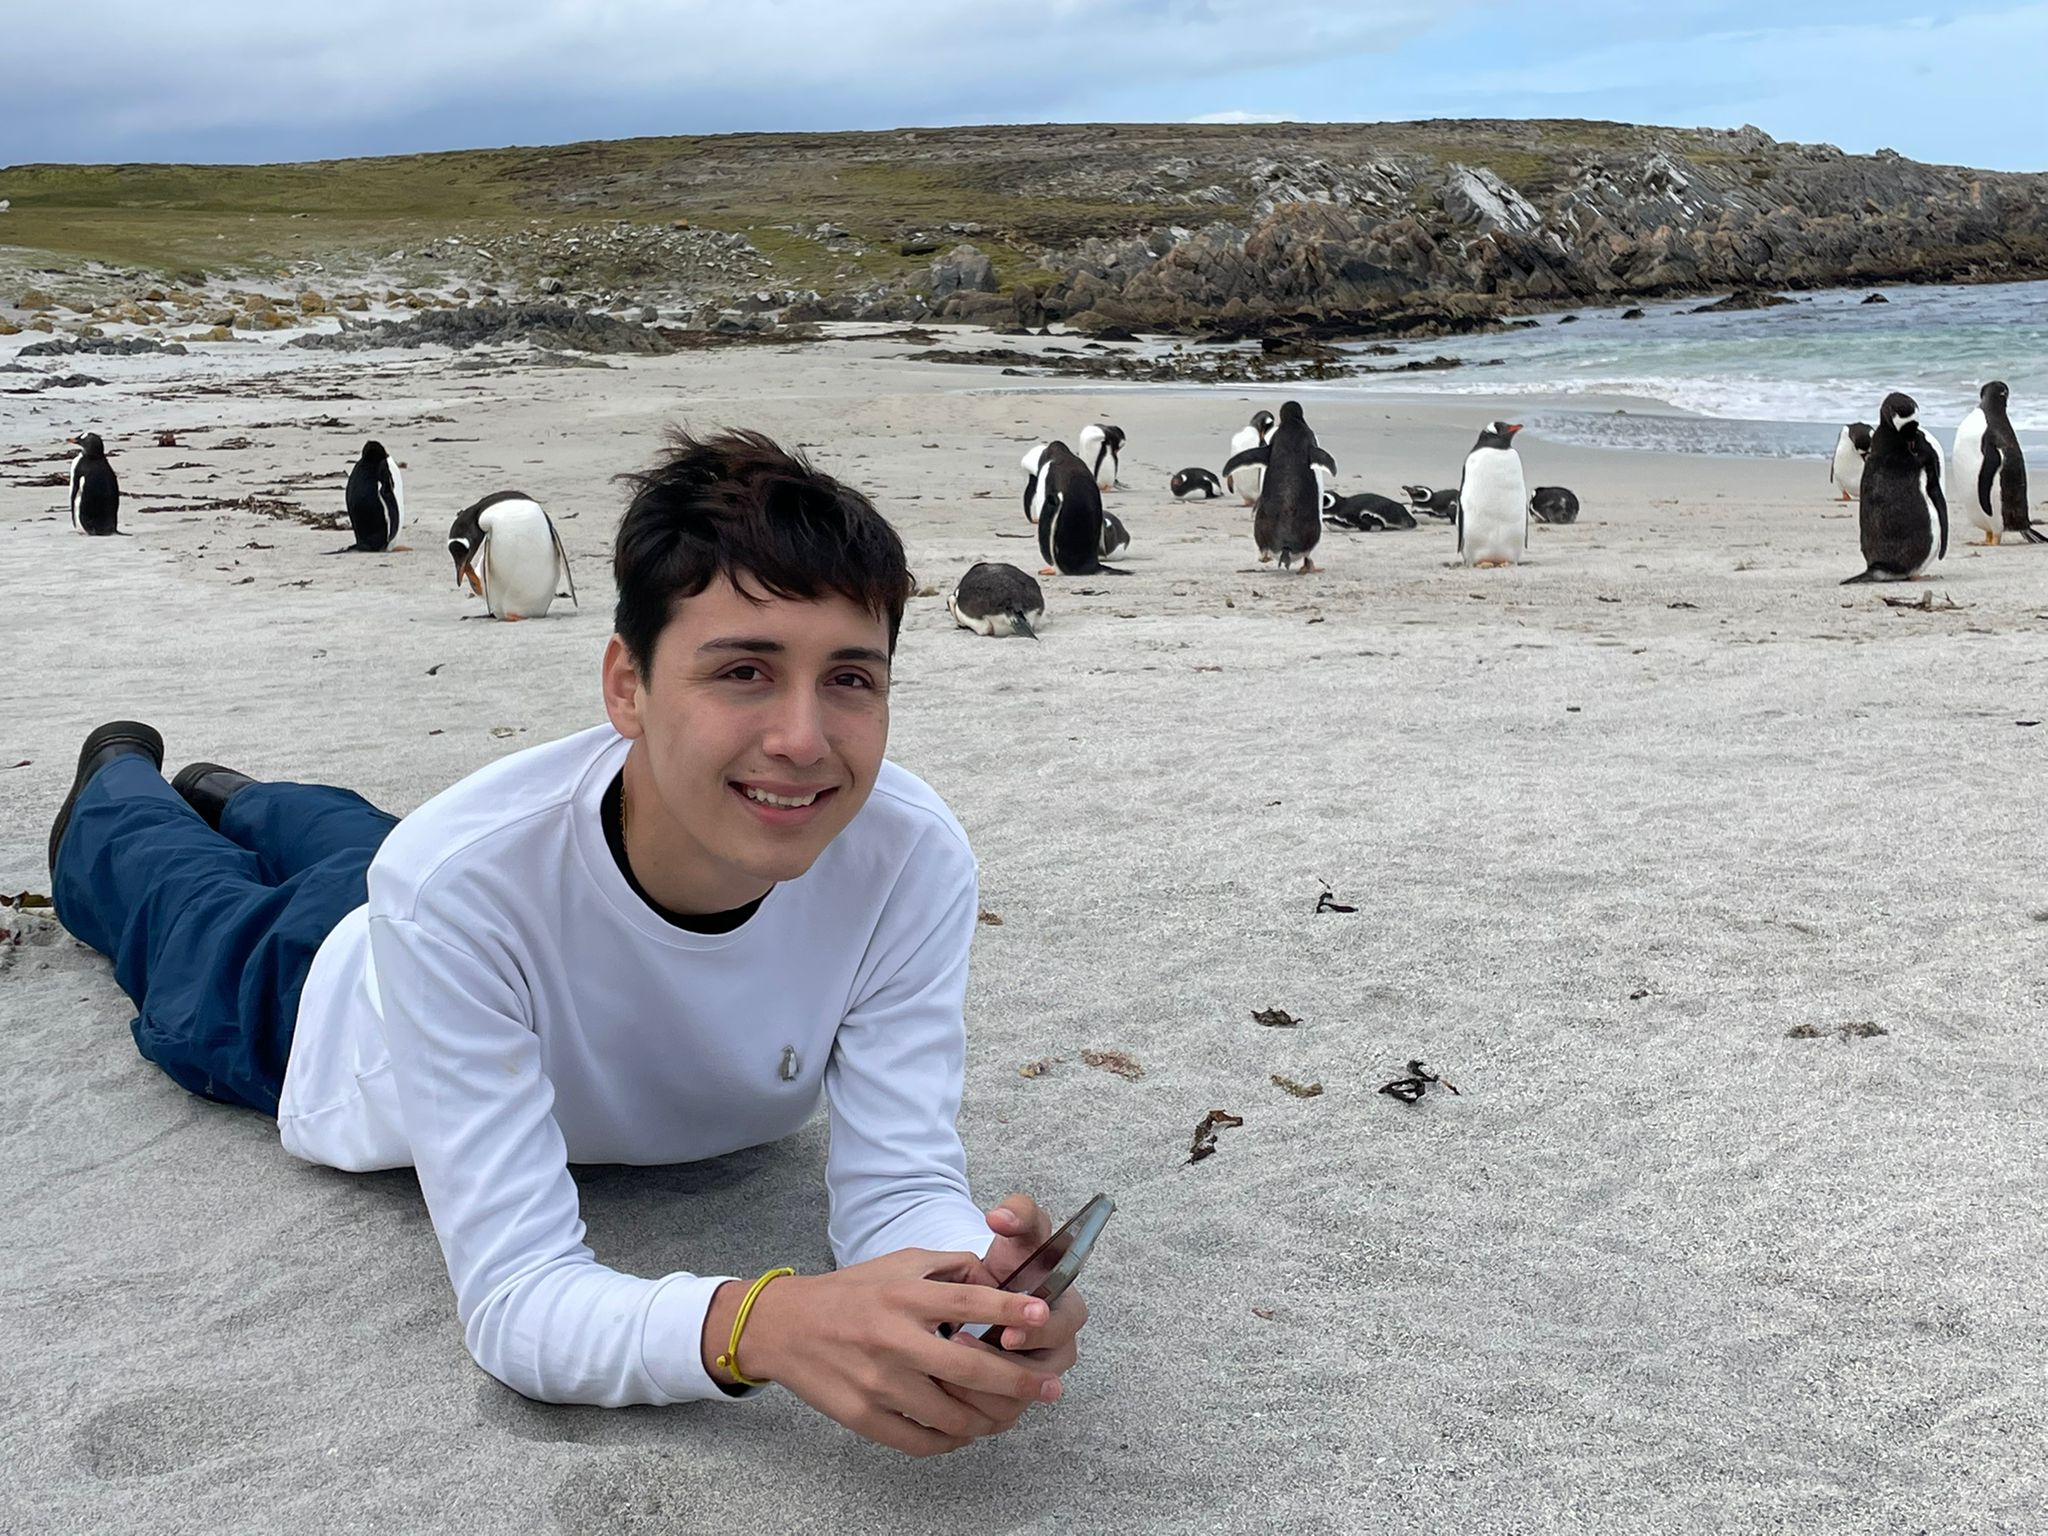 FIU Hospitality student Pedro Luis Velarde pictured with penguins in the Falkland Islands